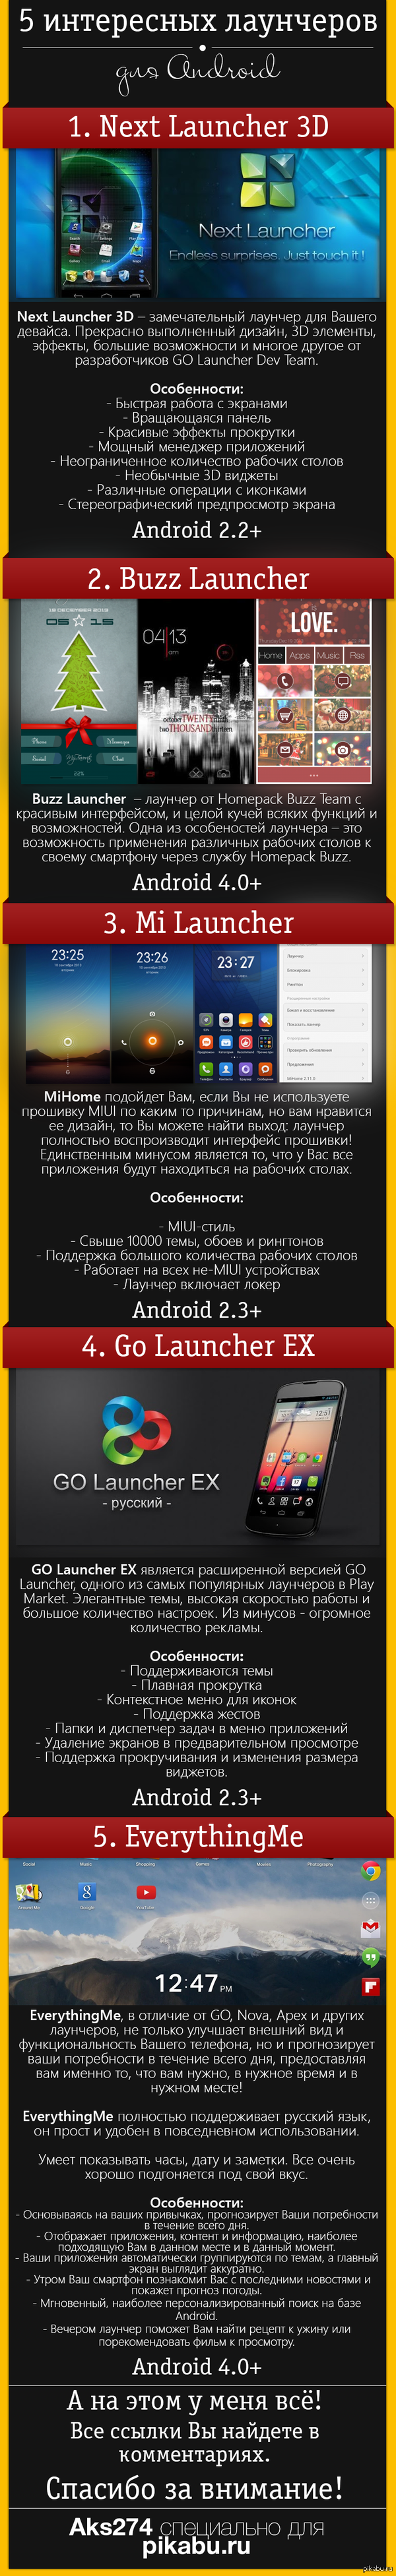    Android [|   |XIII ]  ,  - : ",      iOS  "